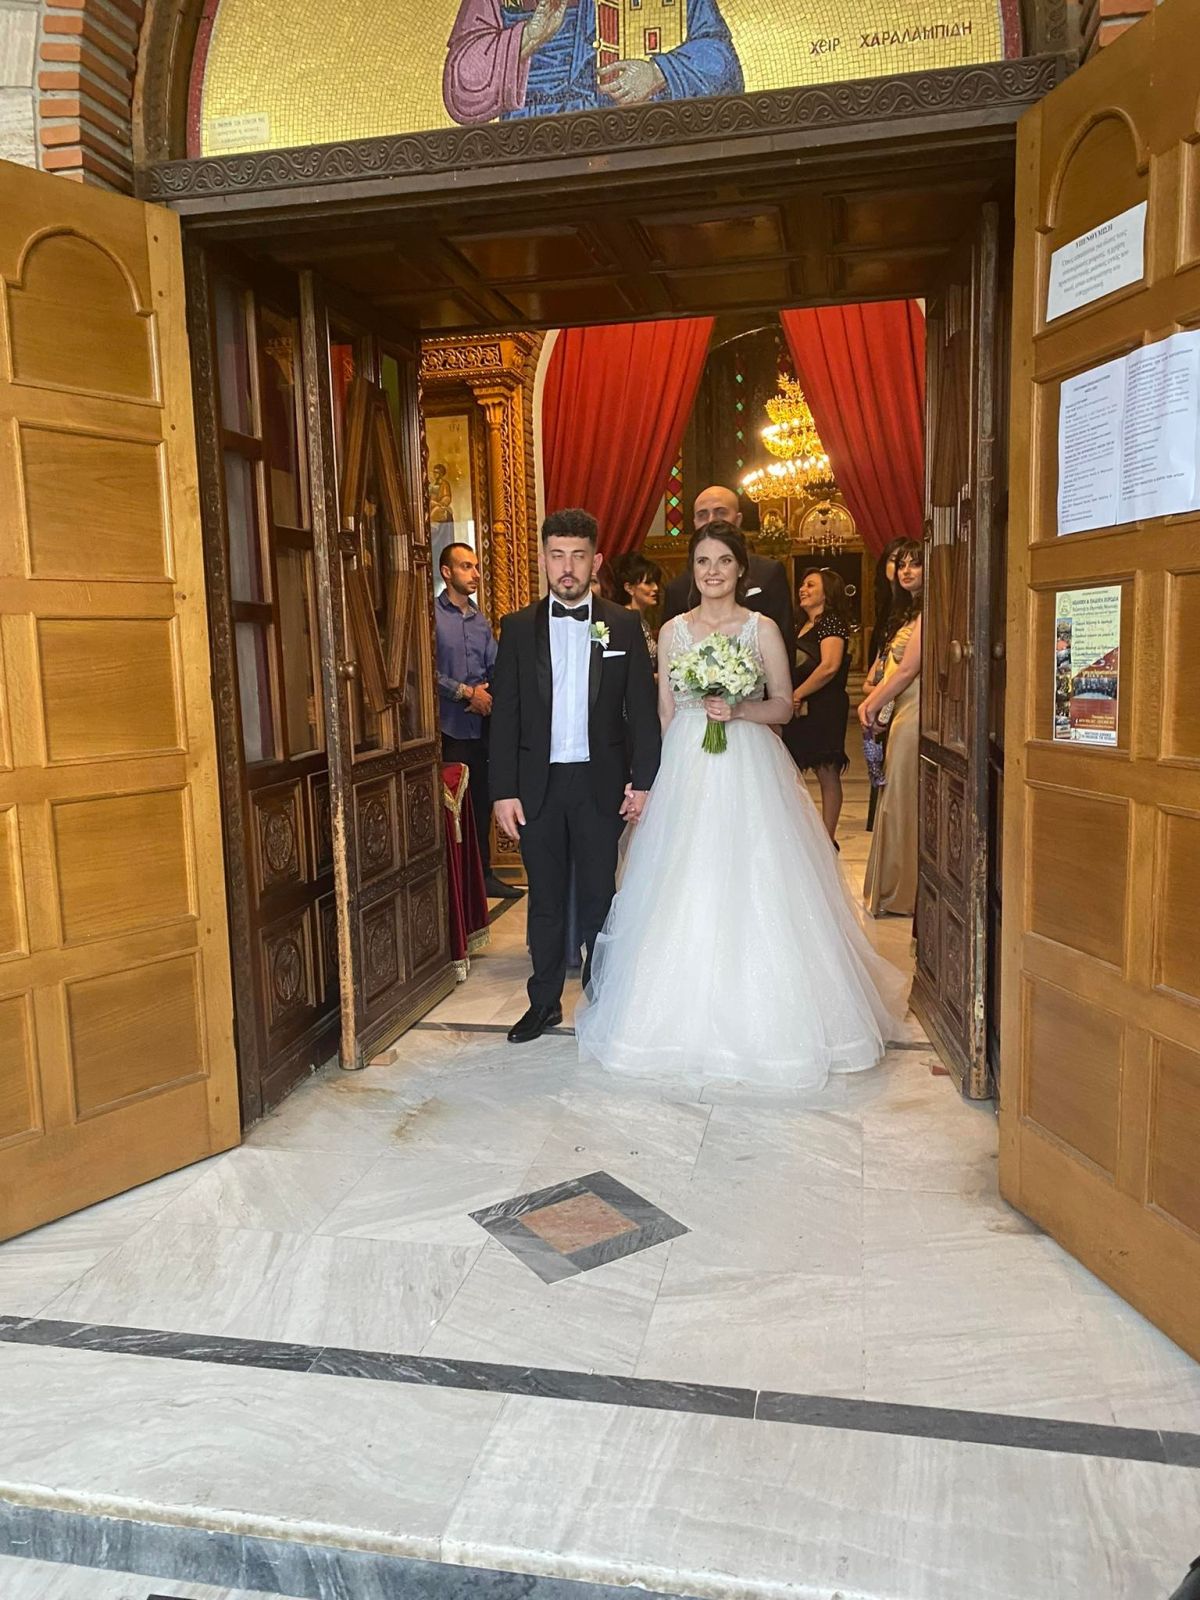 Alcibiades and Mary - Congratulations on your wedding day!